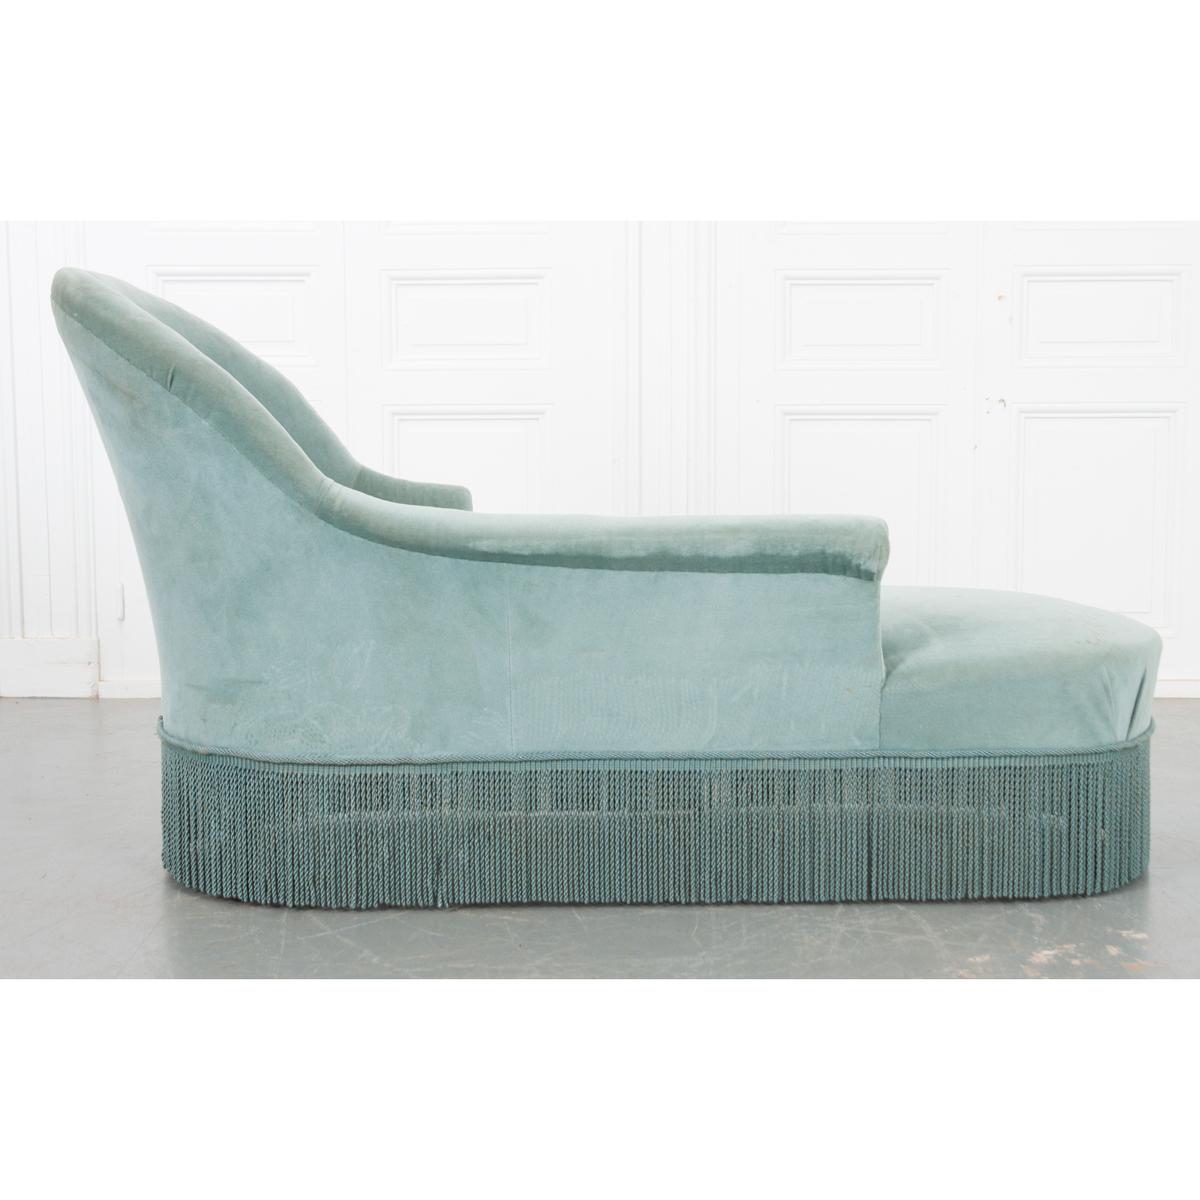 Hand-Crafted French Vintage Chaise with Fringe